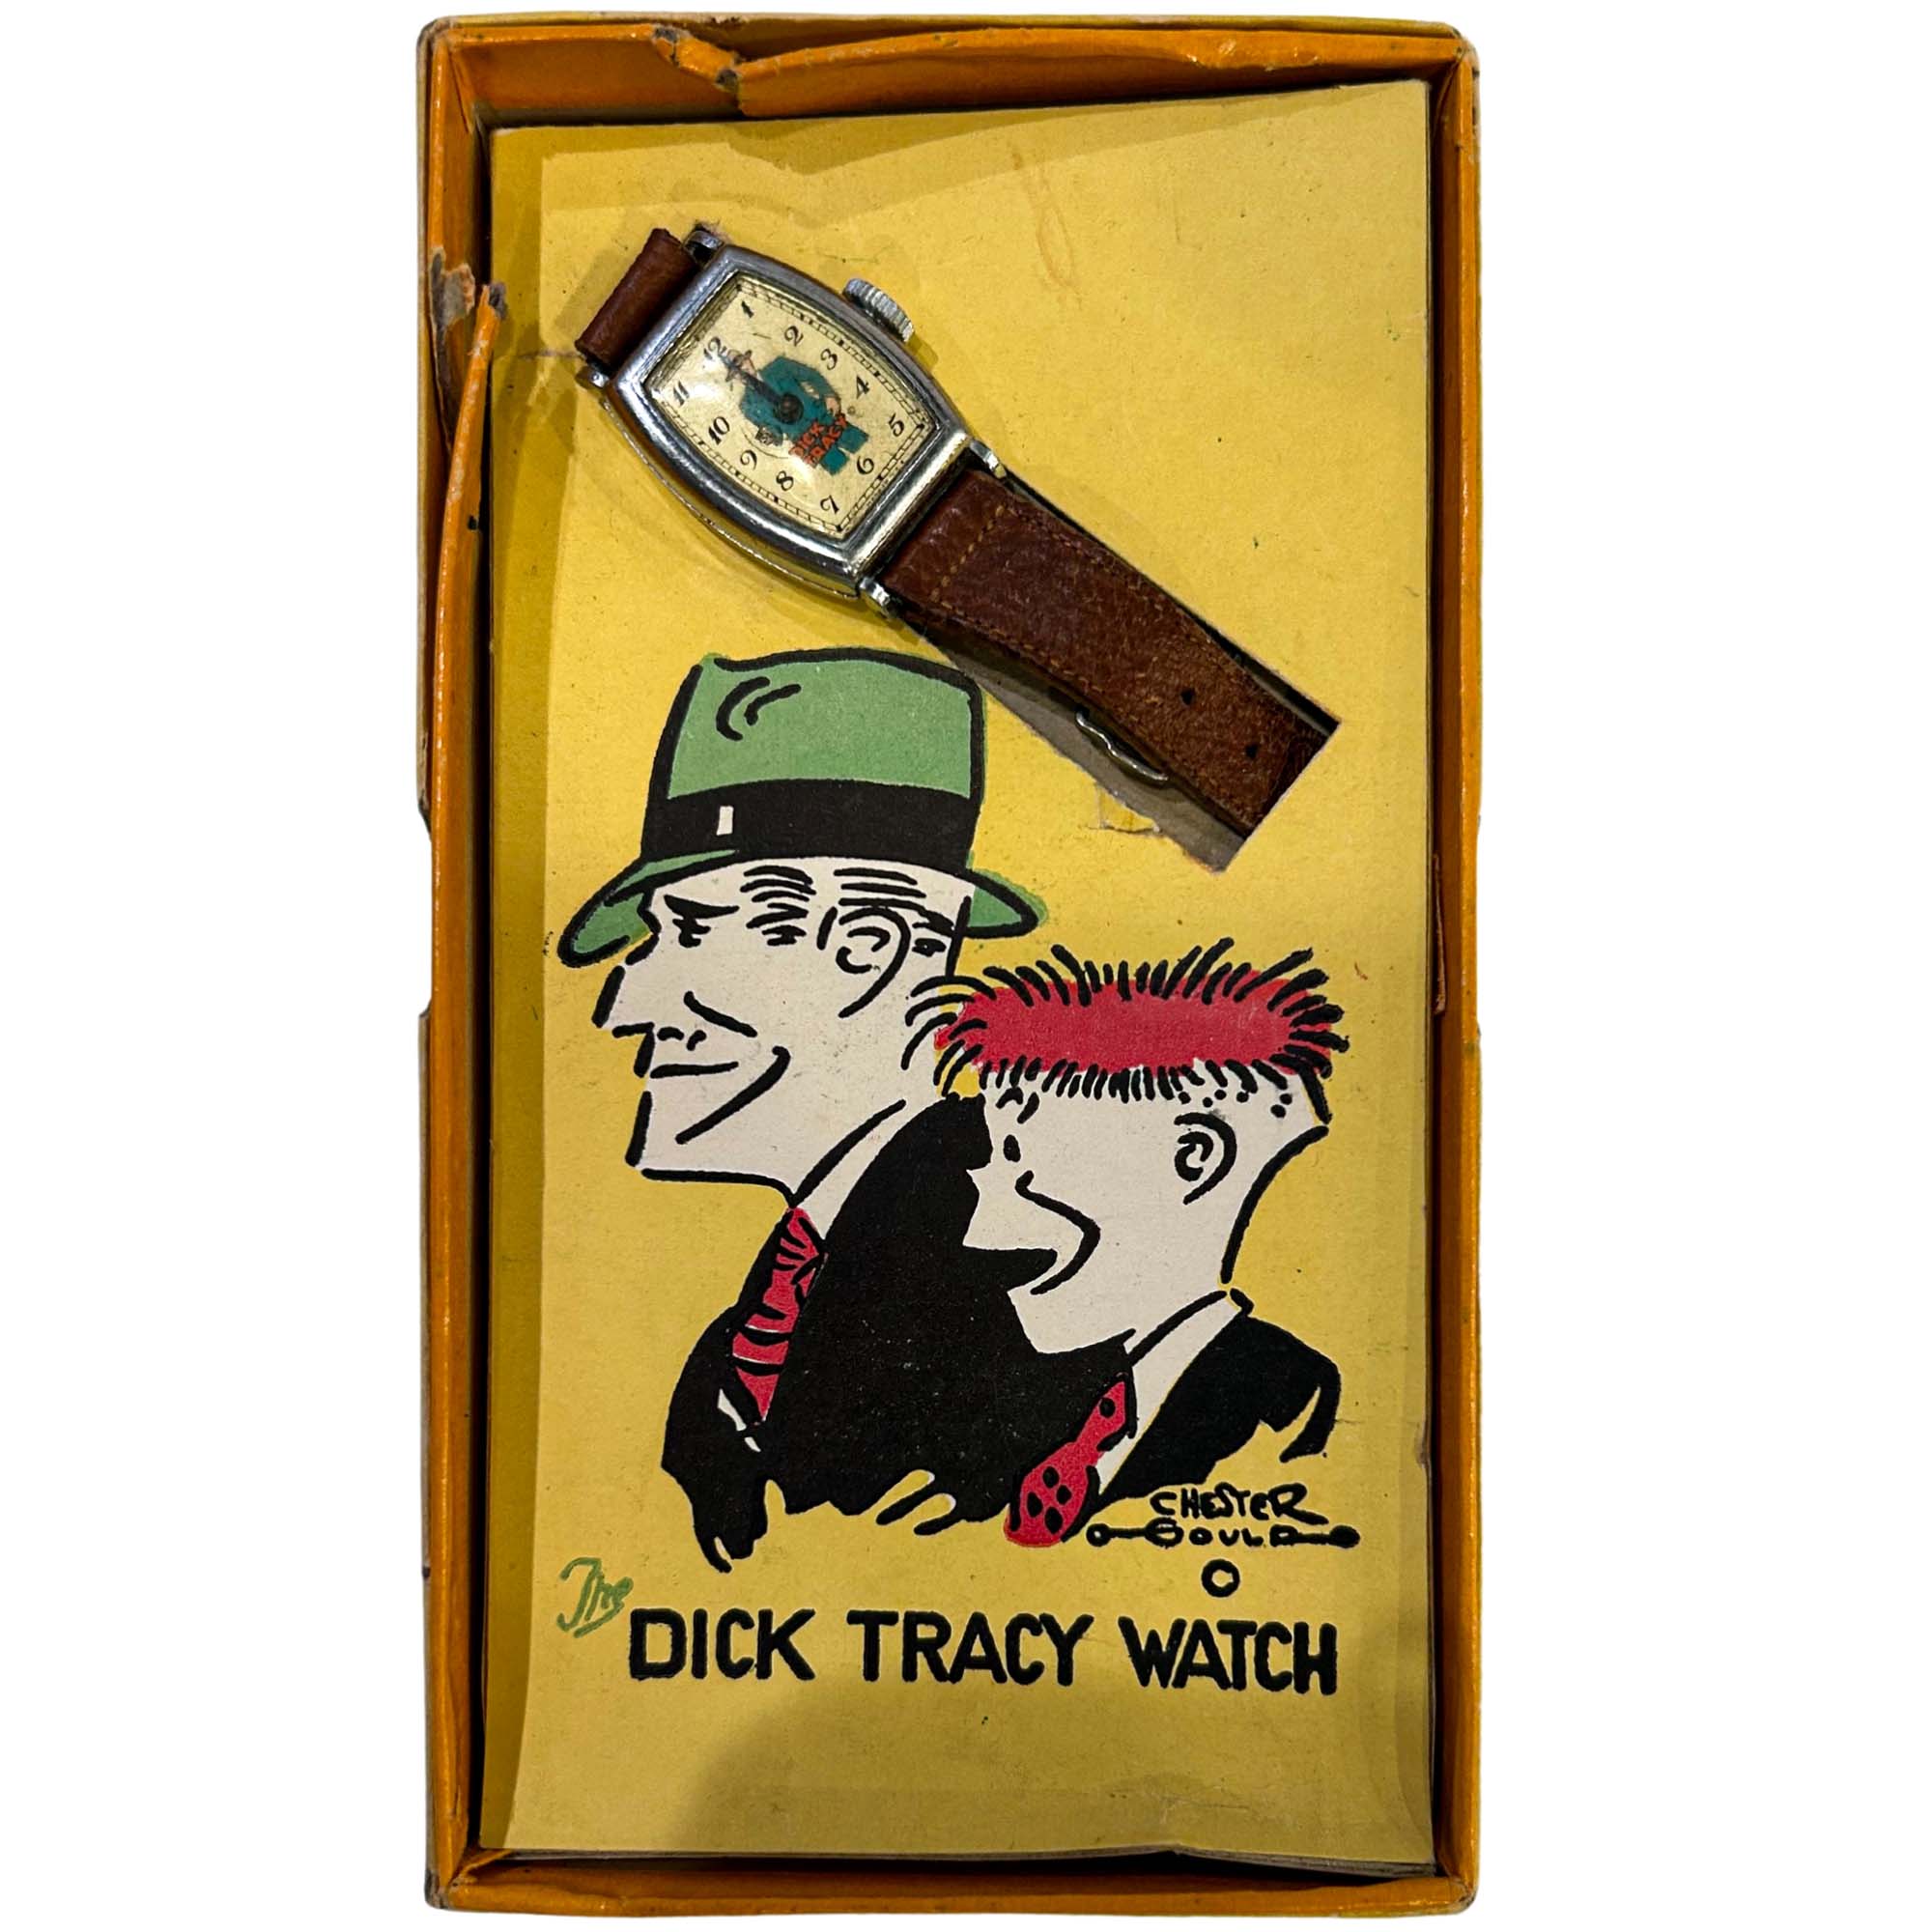 Dick Tracy Watch – Gold & Silver Pawn Shop